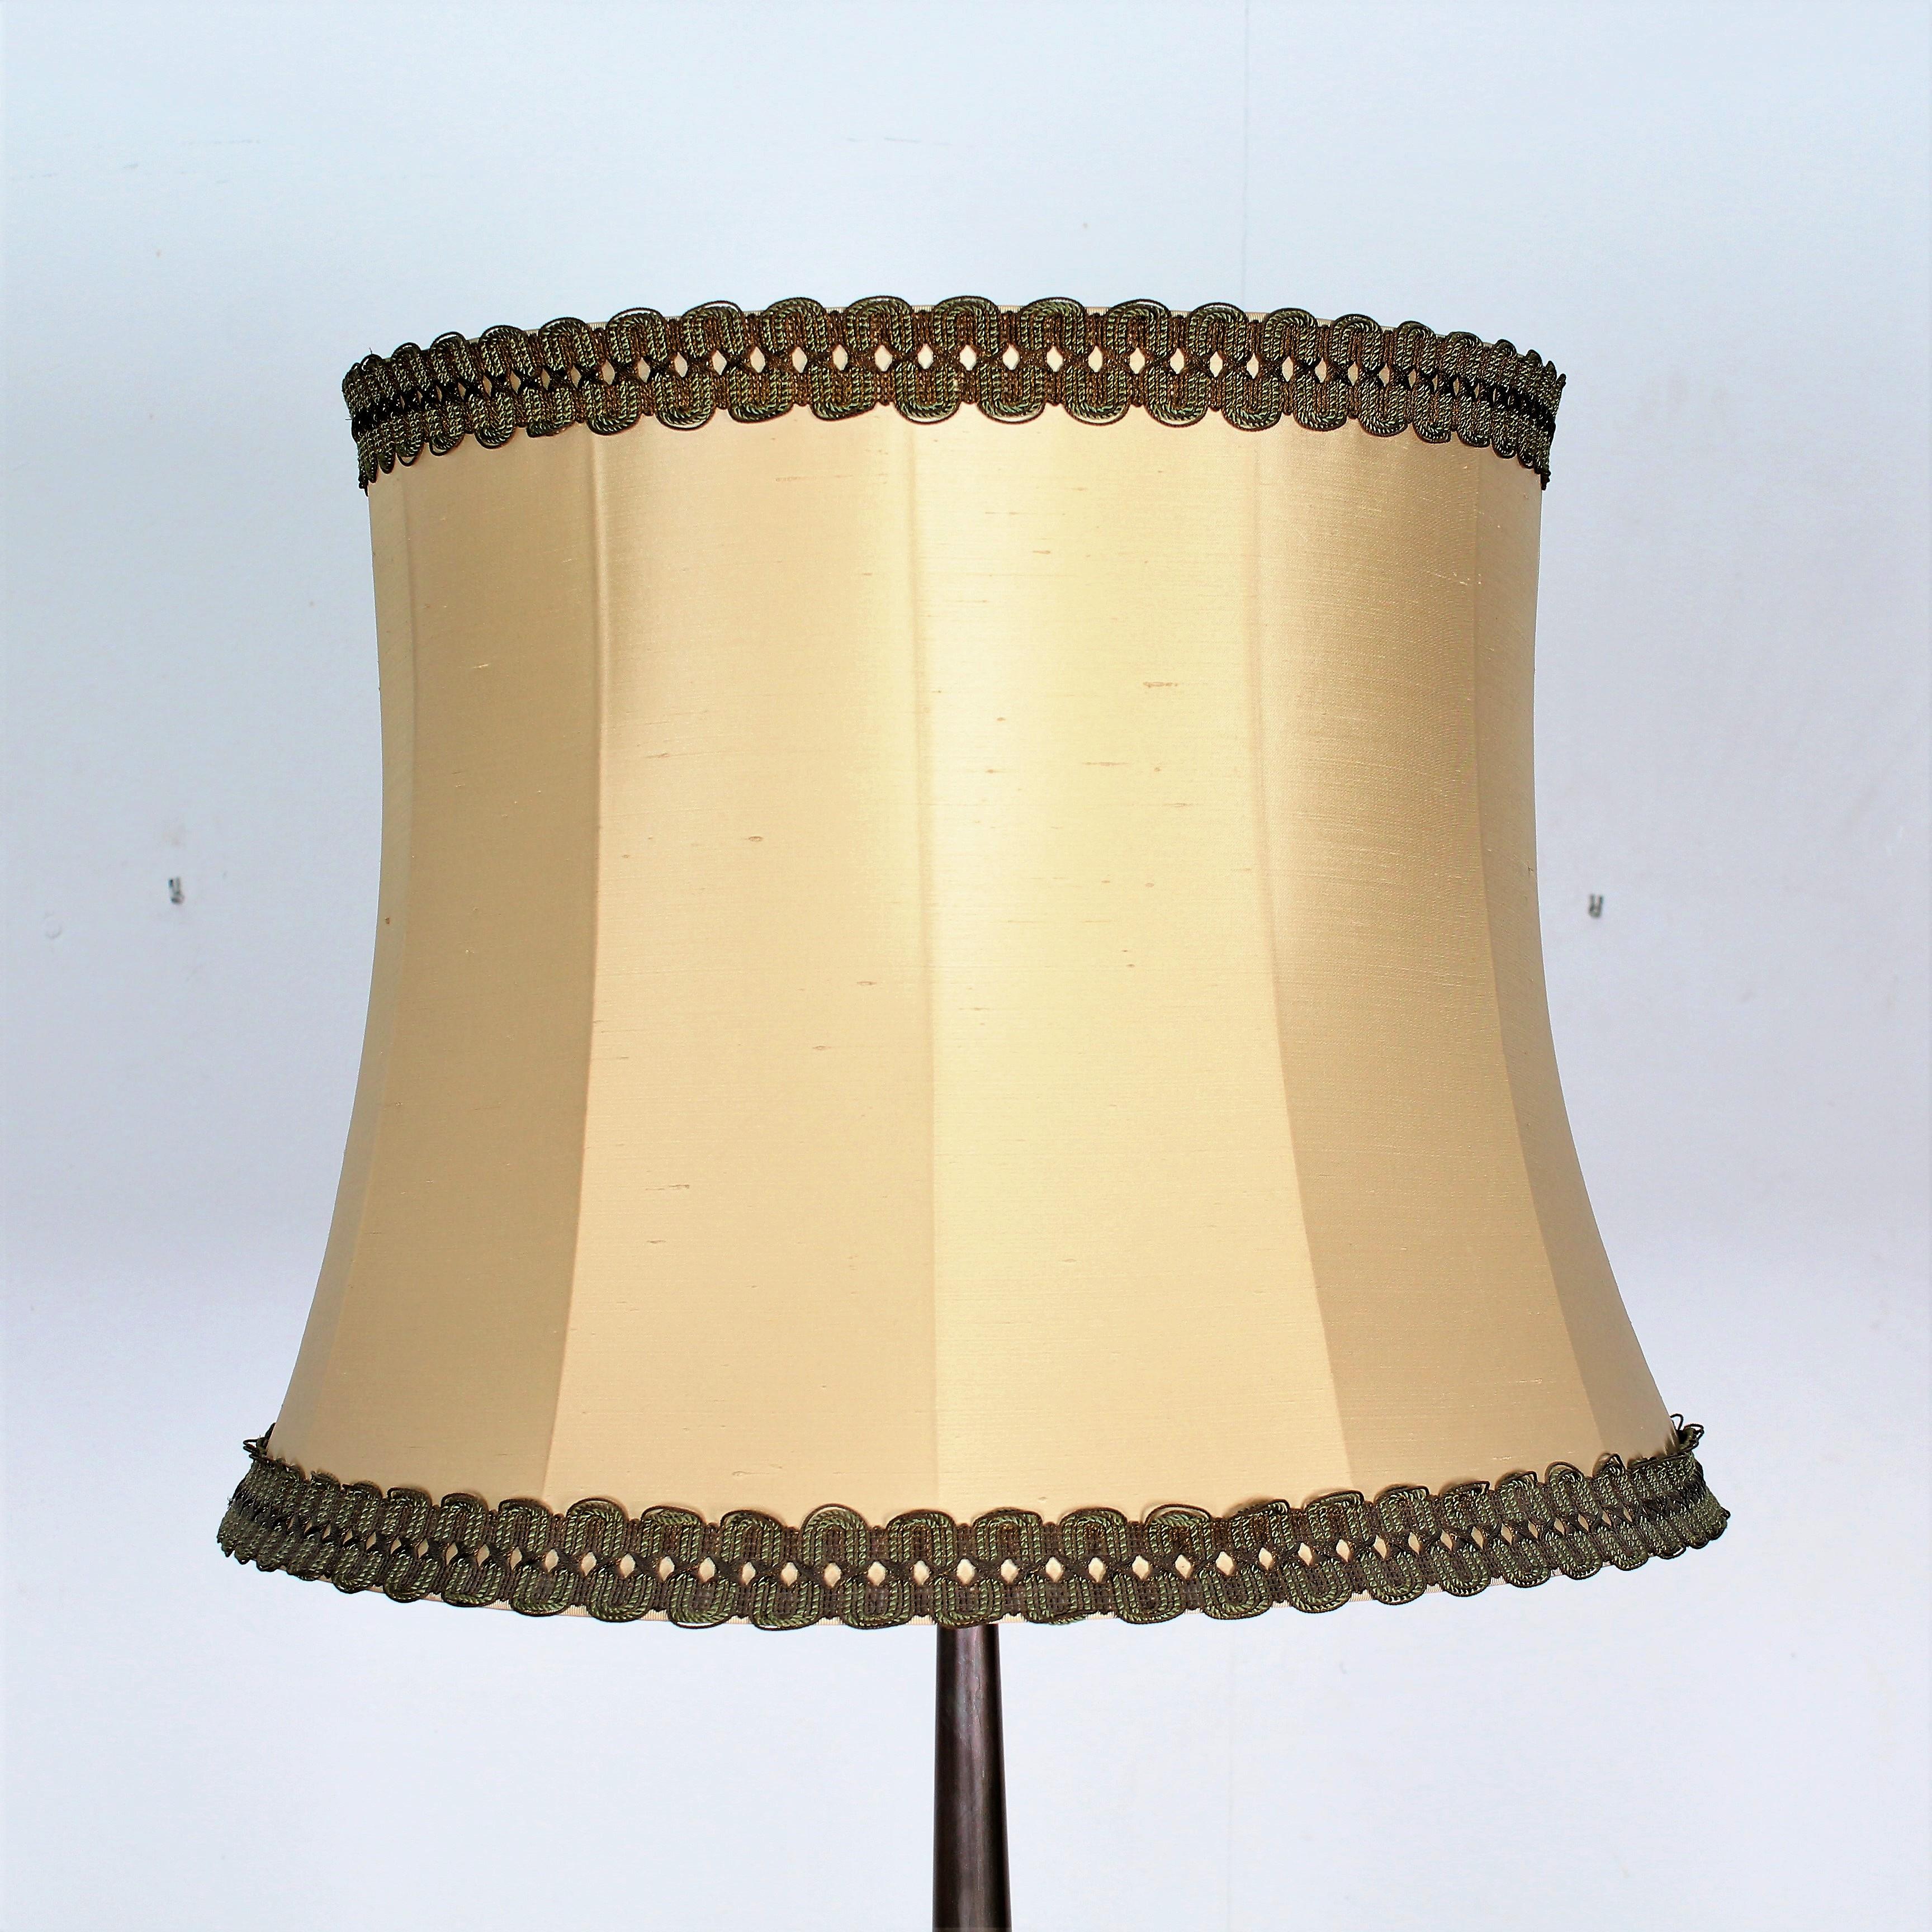 Elegant brass column floor lamp on a tripod base with spherical crystal element in the center and double pull switch , original lampshade .
Very elegant and high quality object.
In the style of Paolo Buffa Italy  1950s.
Wear consistent with age and